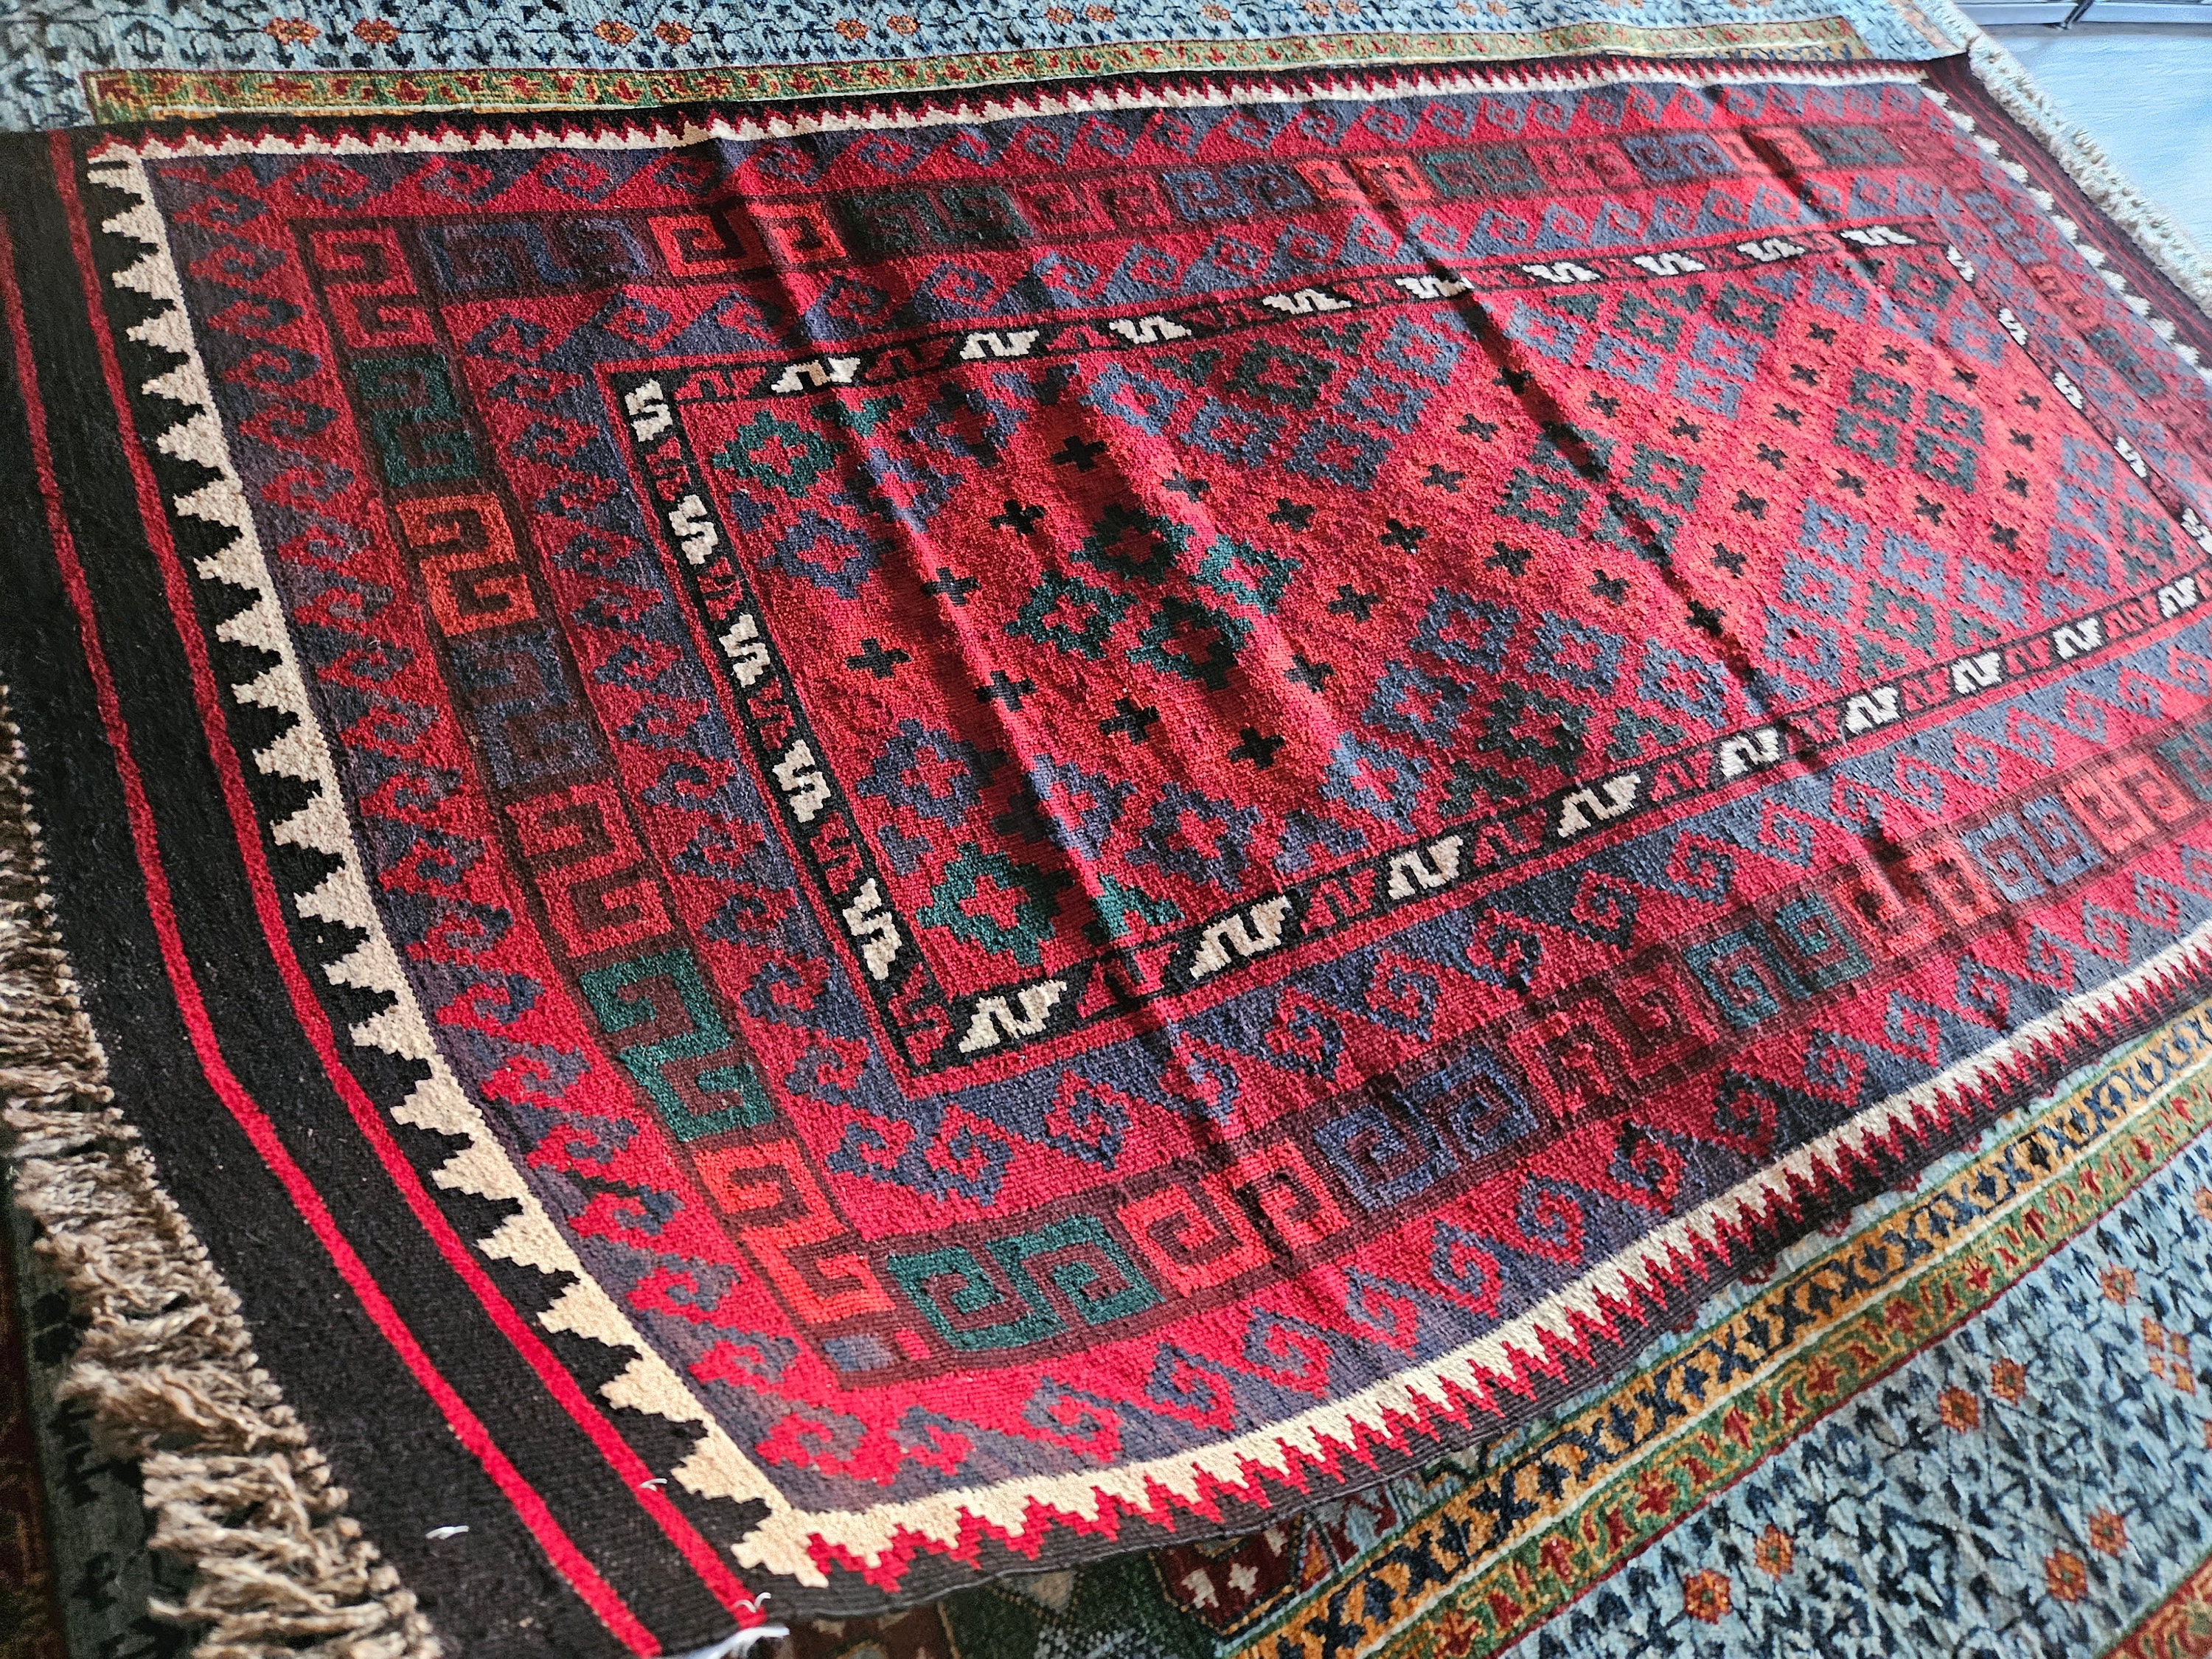 3x7 Afghan Kilim rug, home planner, Gift For Moms, stair carpet, been ourain rug, moroccan rug, rustic decor, work from home, sisal rugs